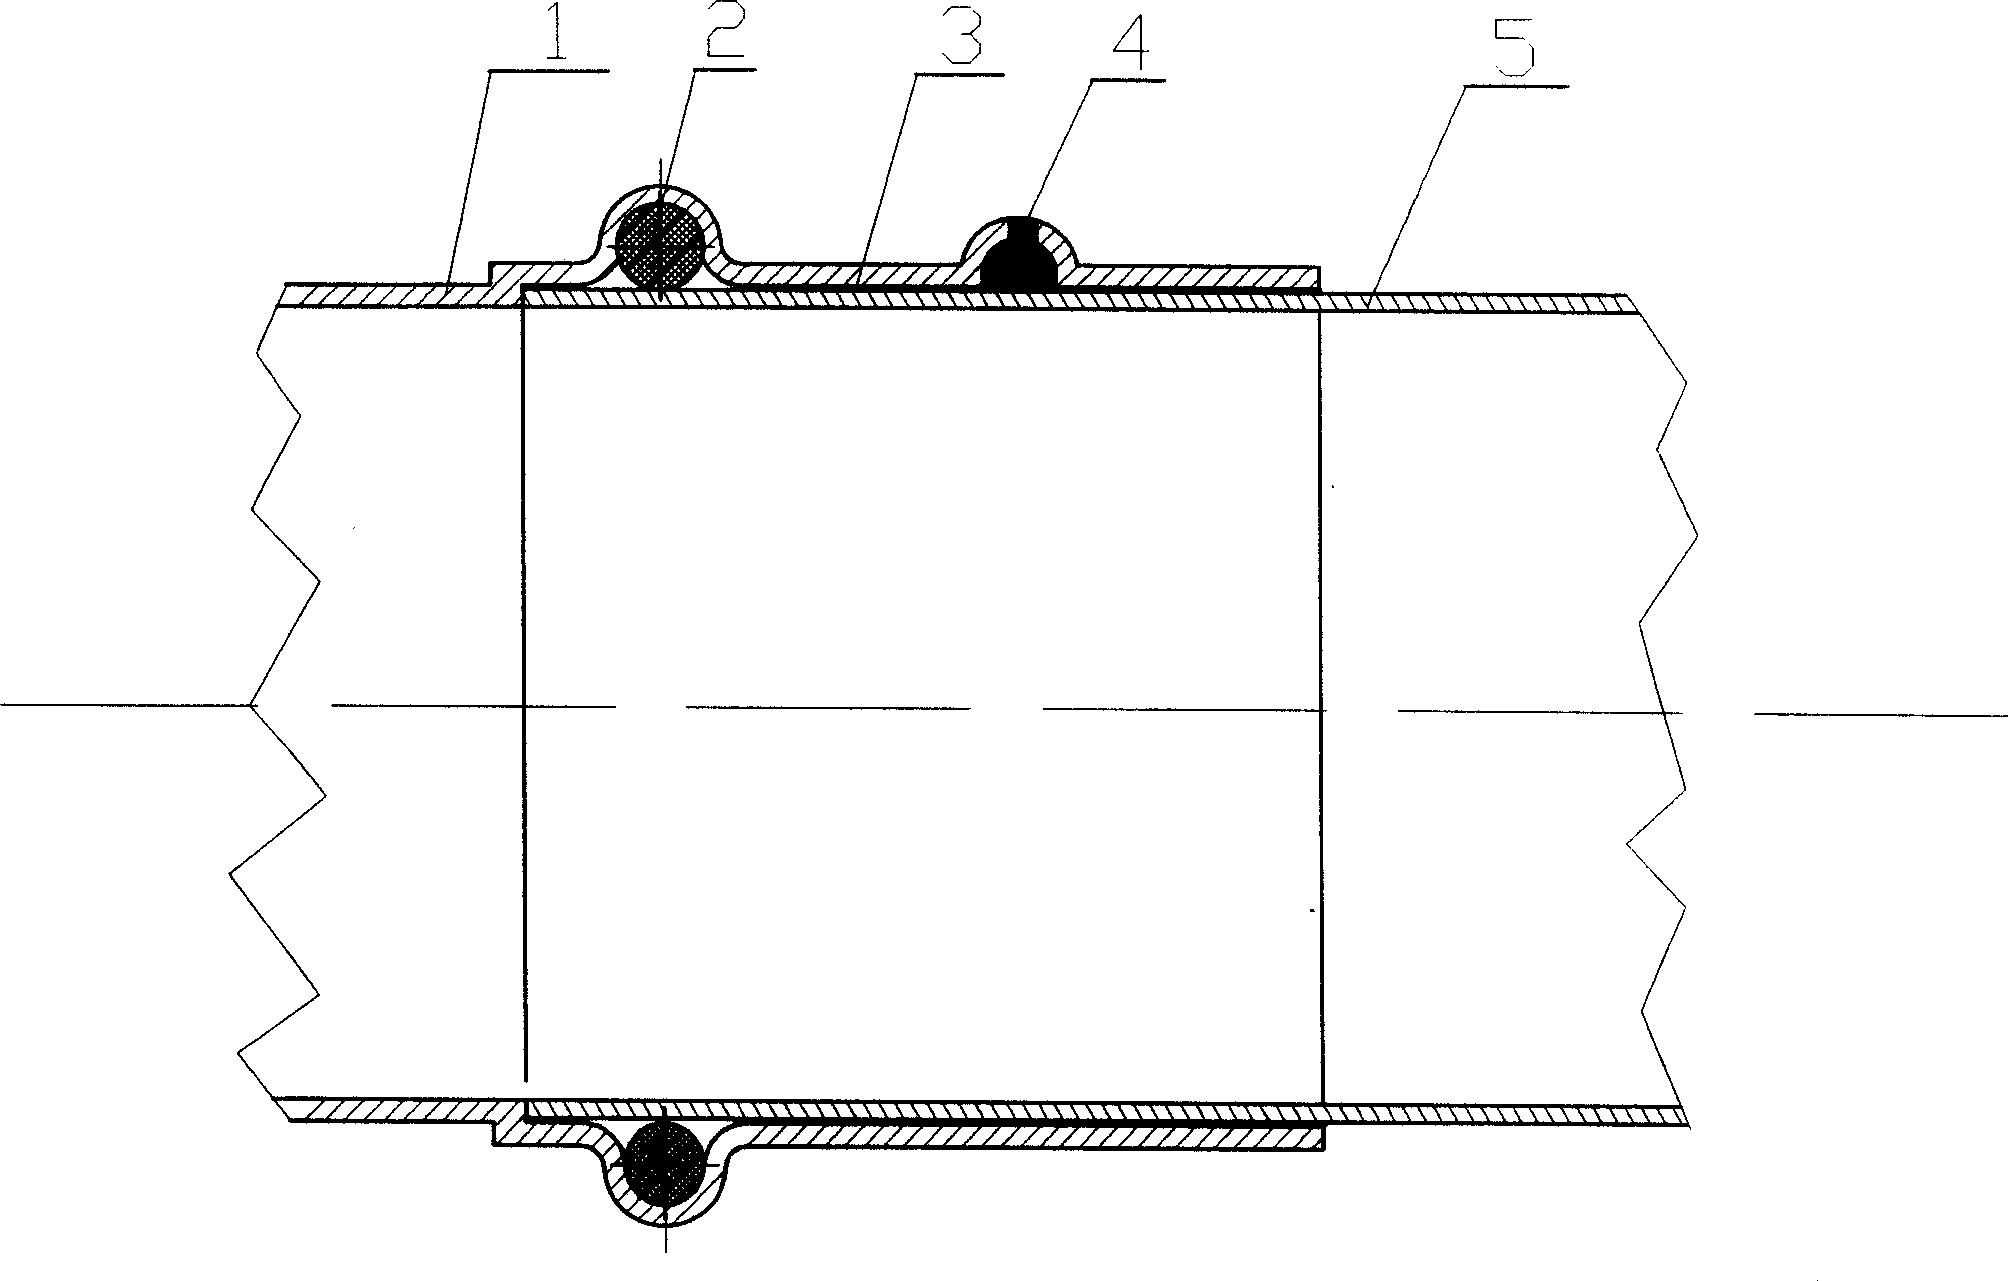 Injecting glue type connection method for sealing stainless steel pipe in thin wall